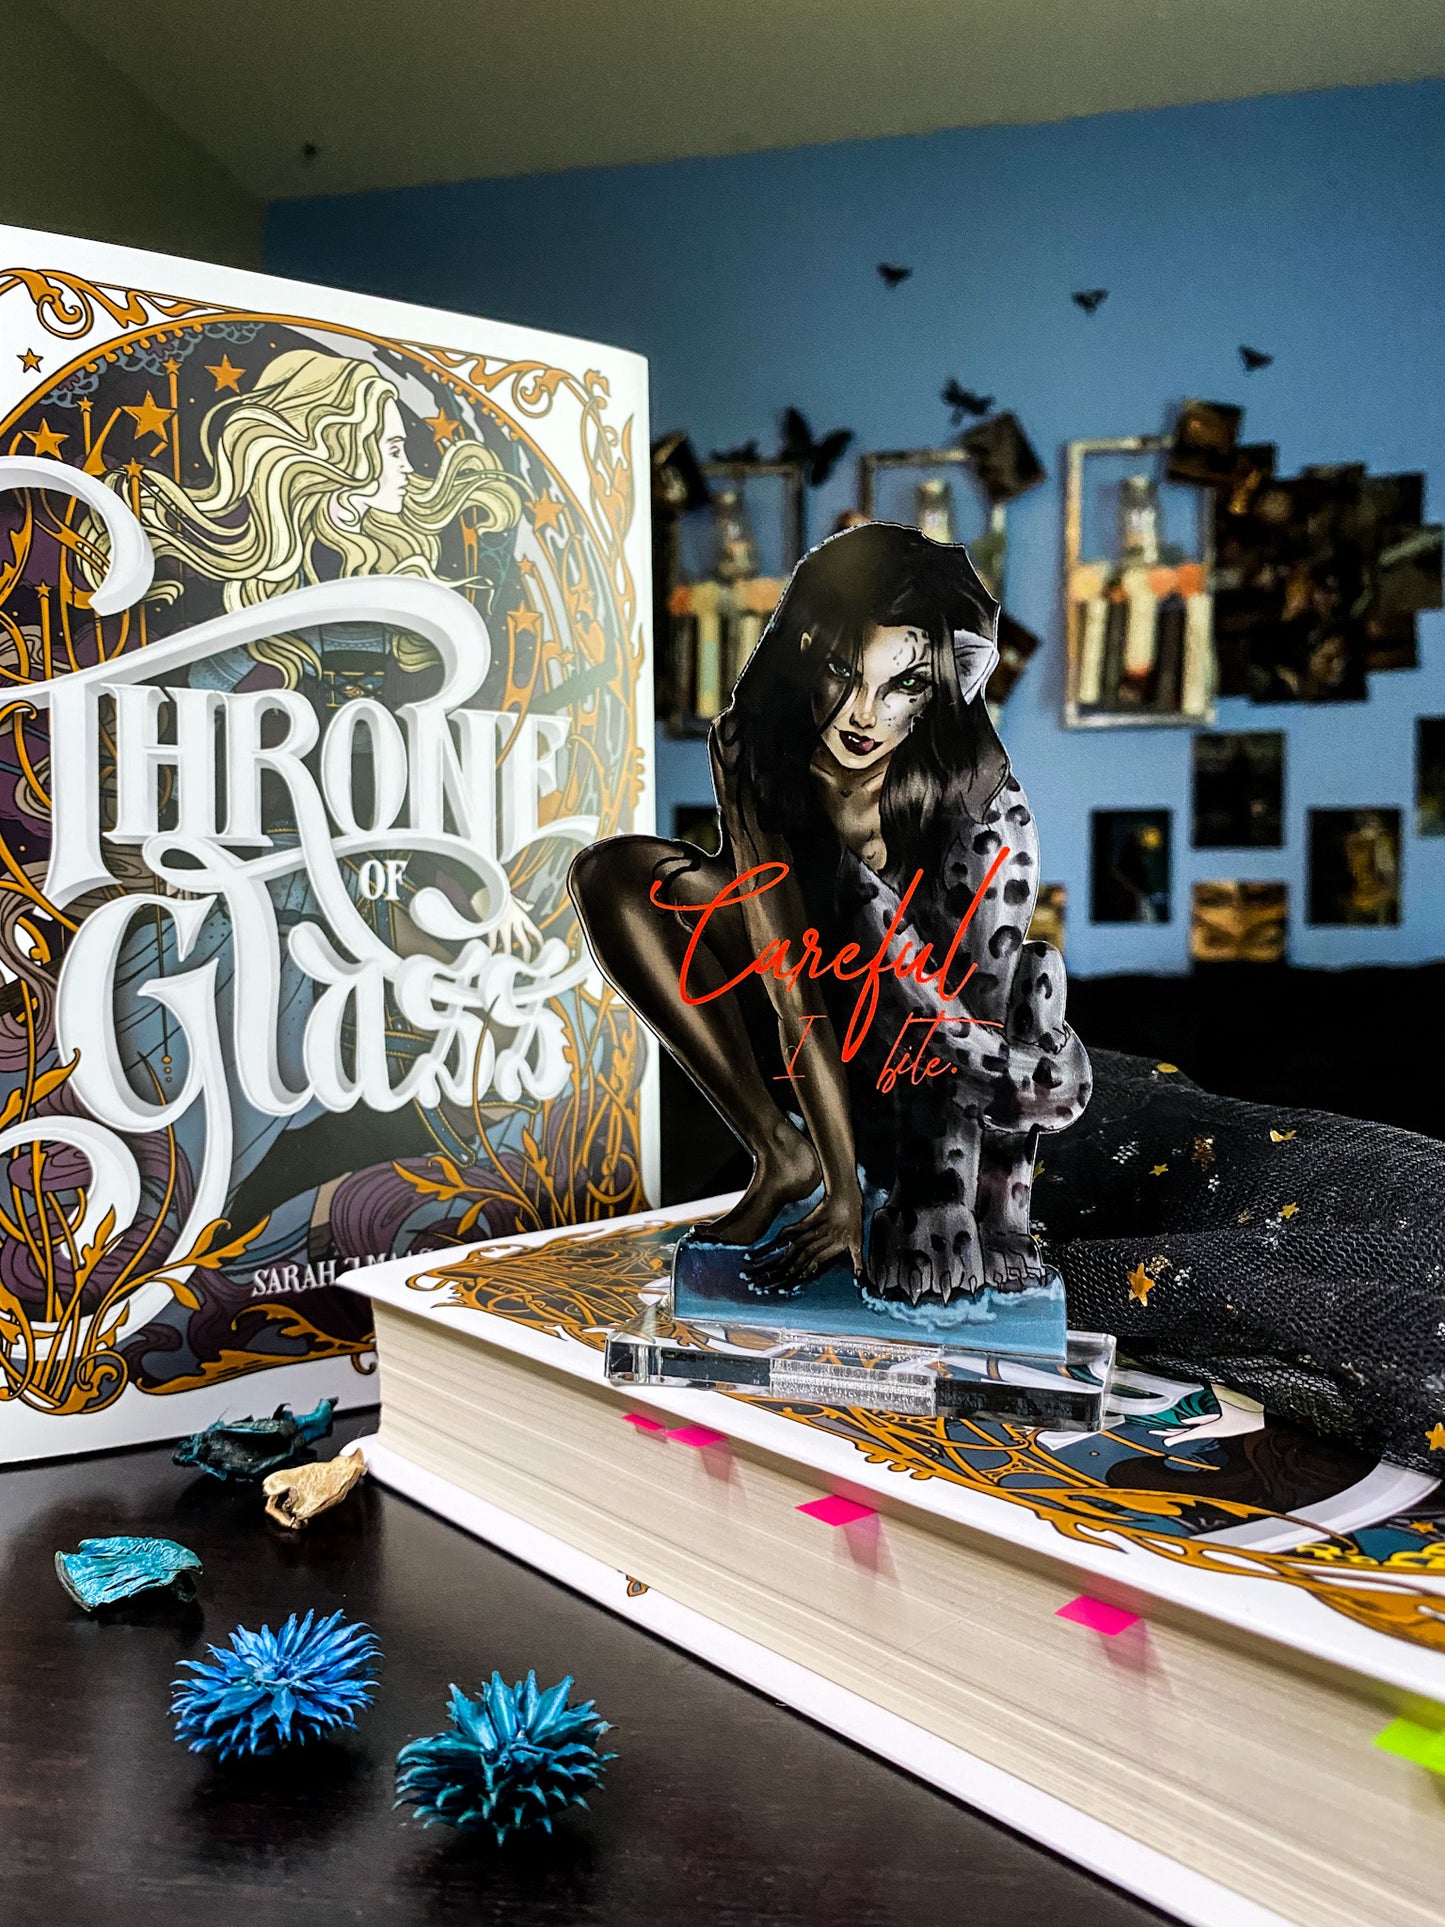 "Careful... I bite." - Throne of Glass Series - Freestanding Bookshelf / Desktop Acrylic Accessory - Officially licensed by Sarah J. Maas - D55